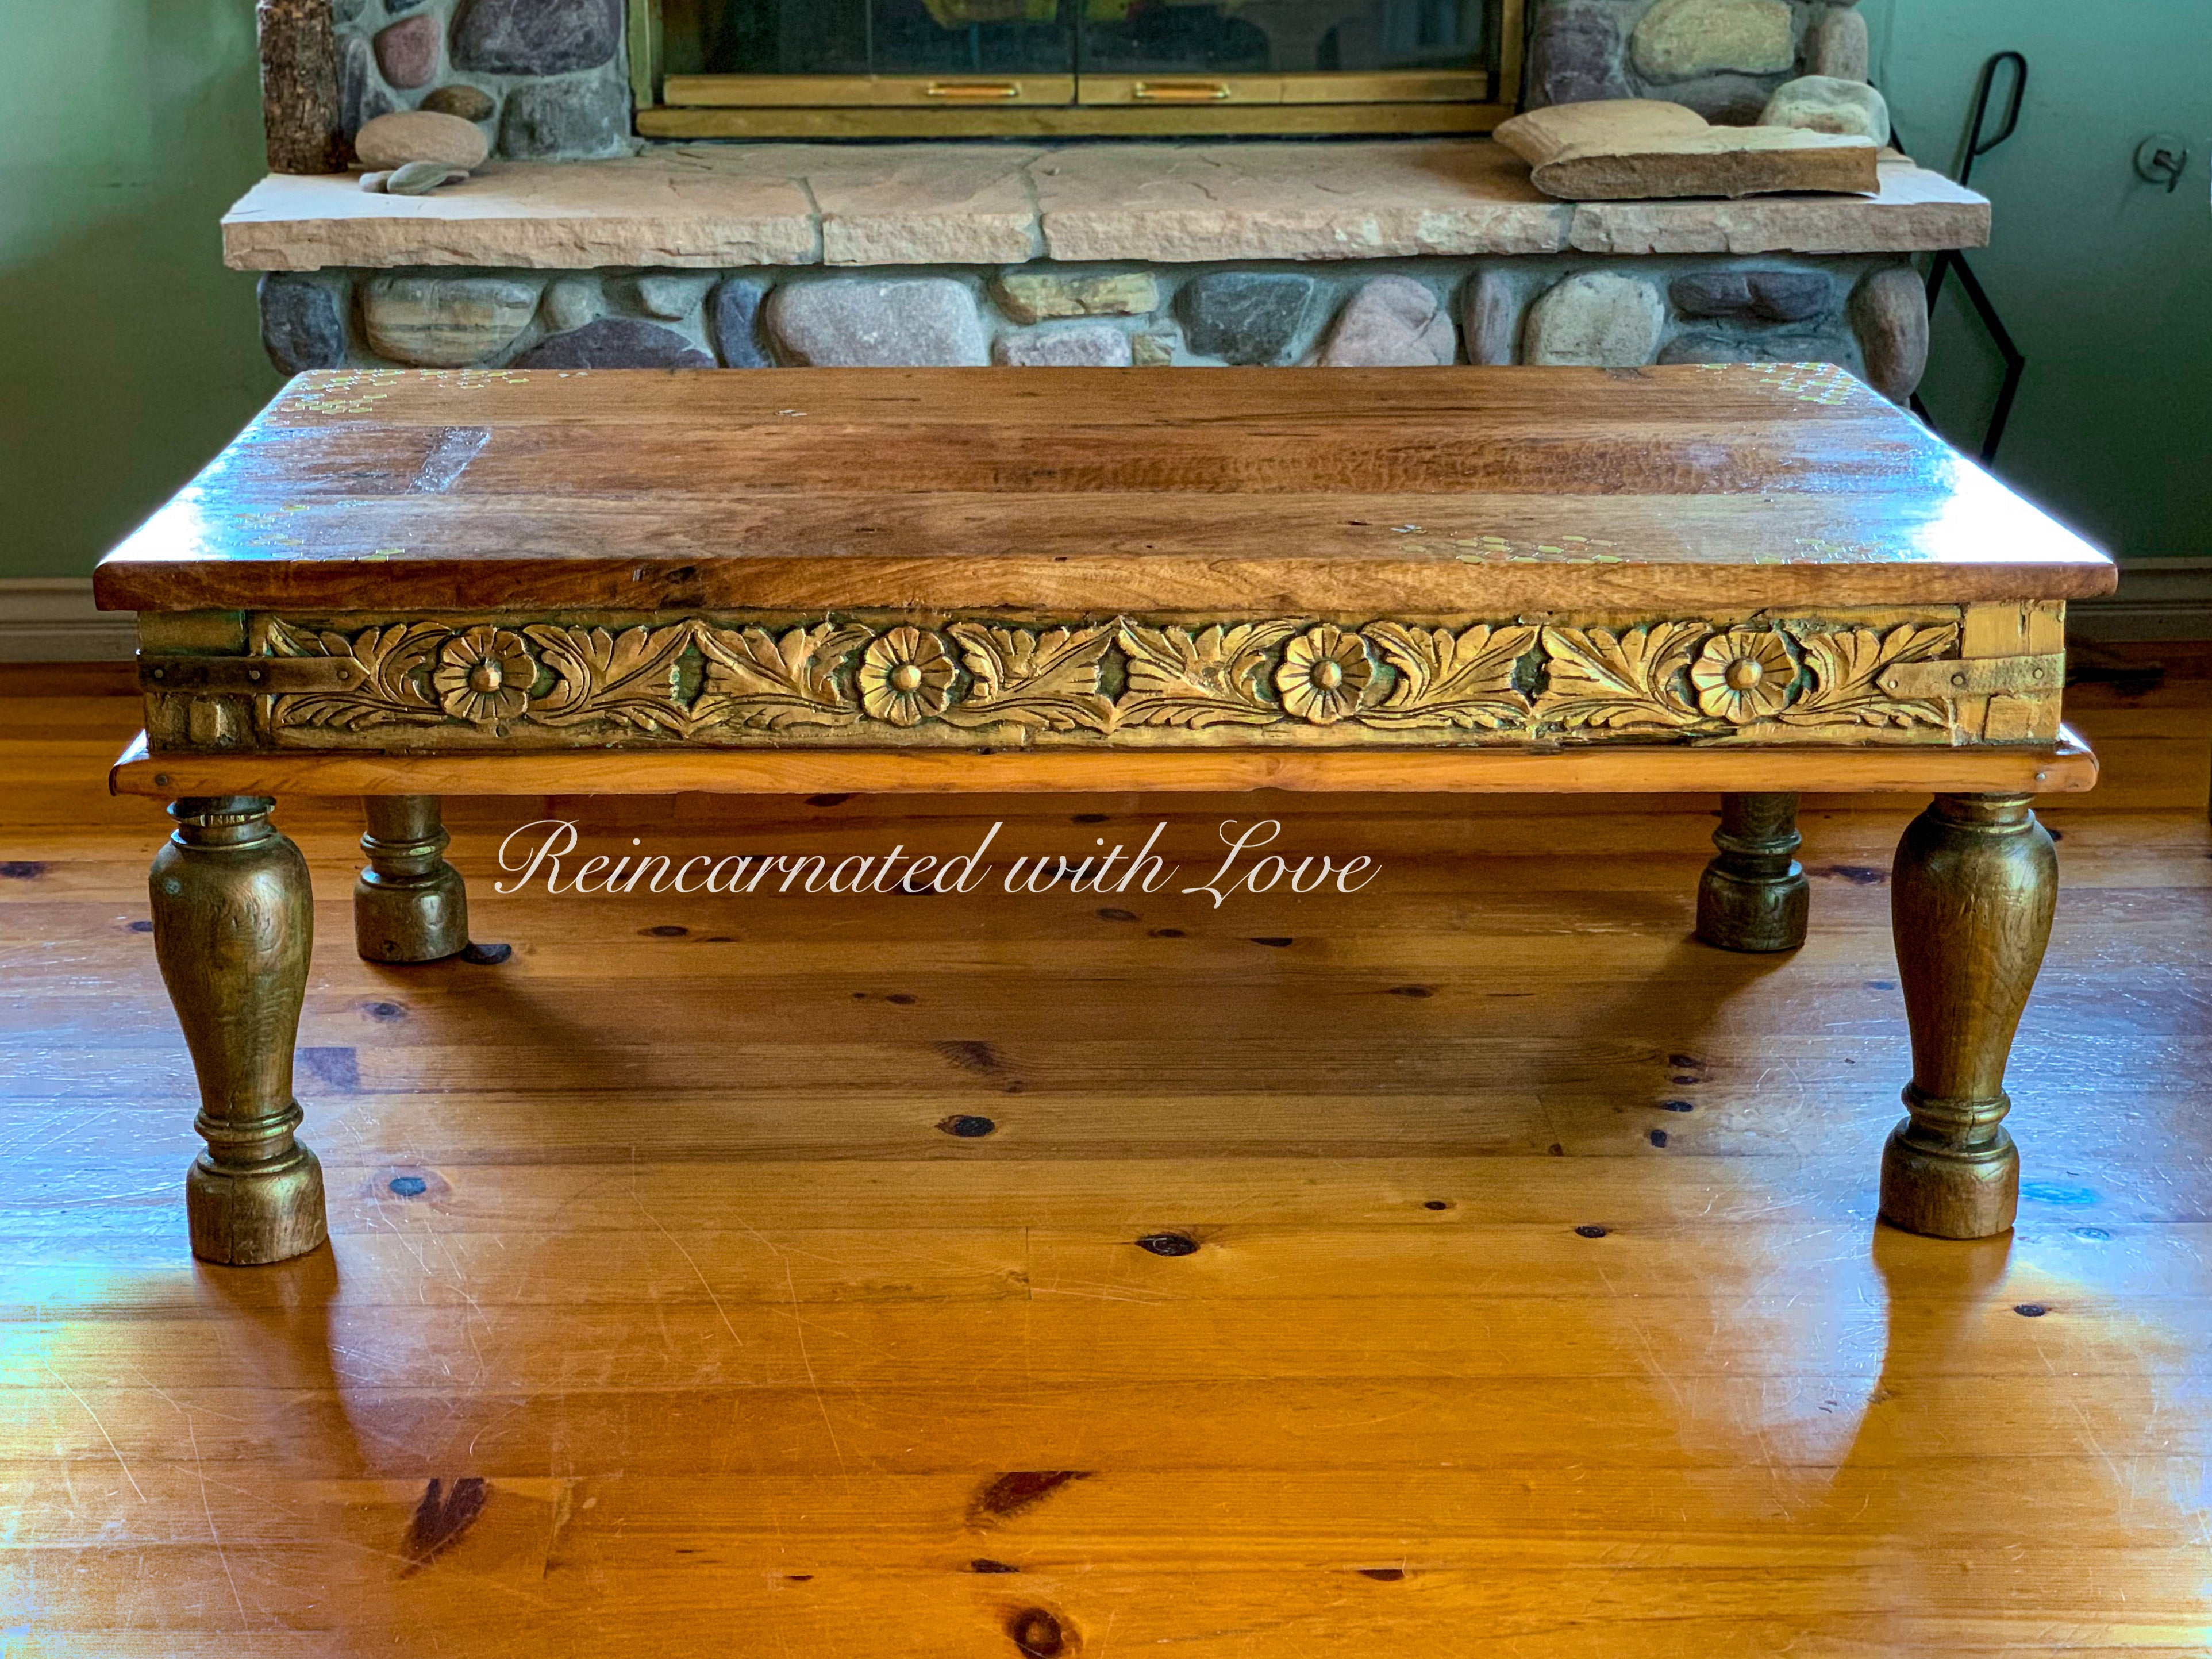 A reclaimed wood coffee table painted in distressed green with golden highlights over stained wood.